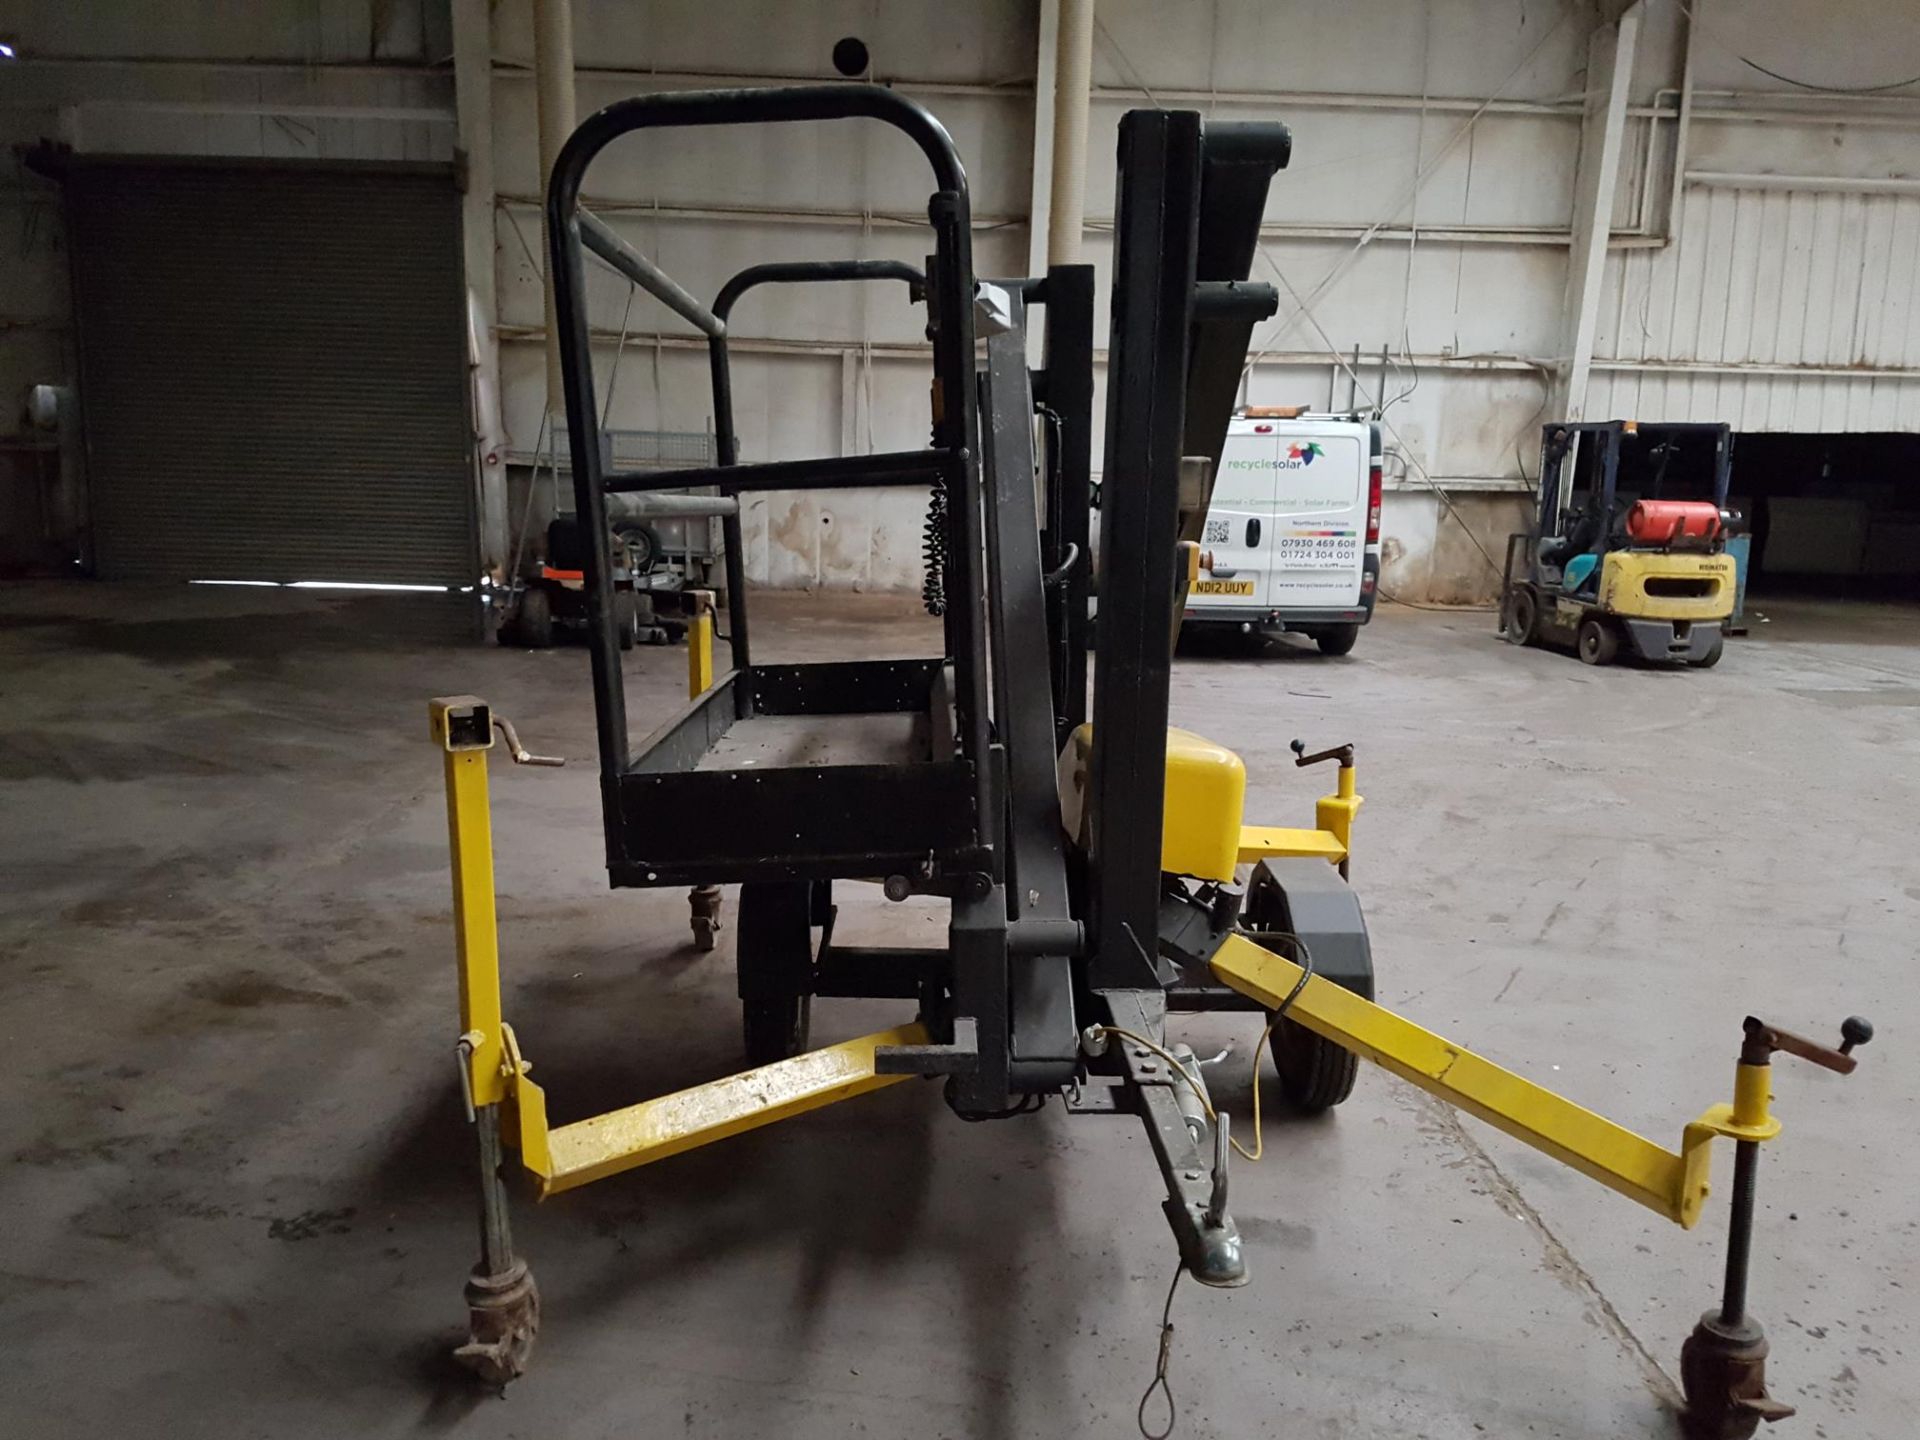 * Power Tower 110V Electric Boom Lift 1996 Class A1 Power Tower 110V Electric Boom Lift. S/N 0118, - Image 4 of 9